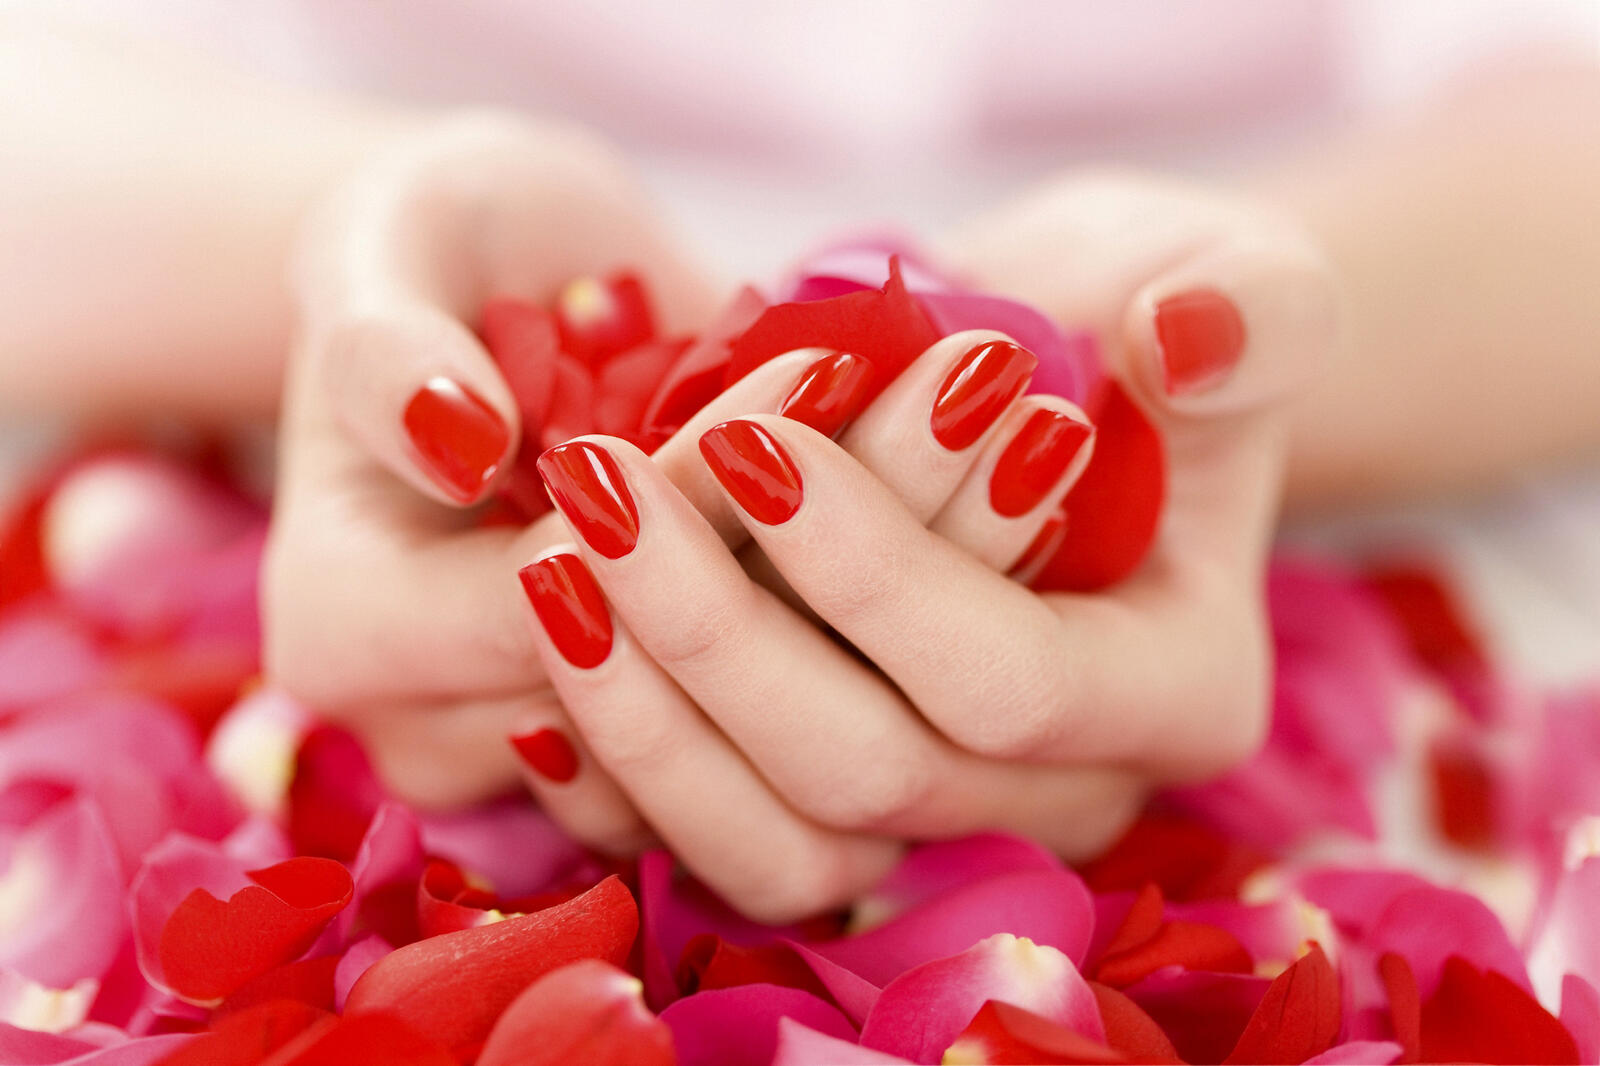 Wallpapers nails manicure red on the desktop